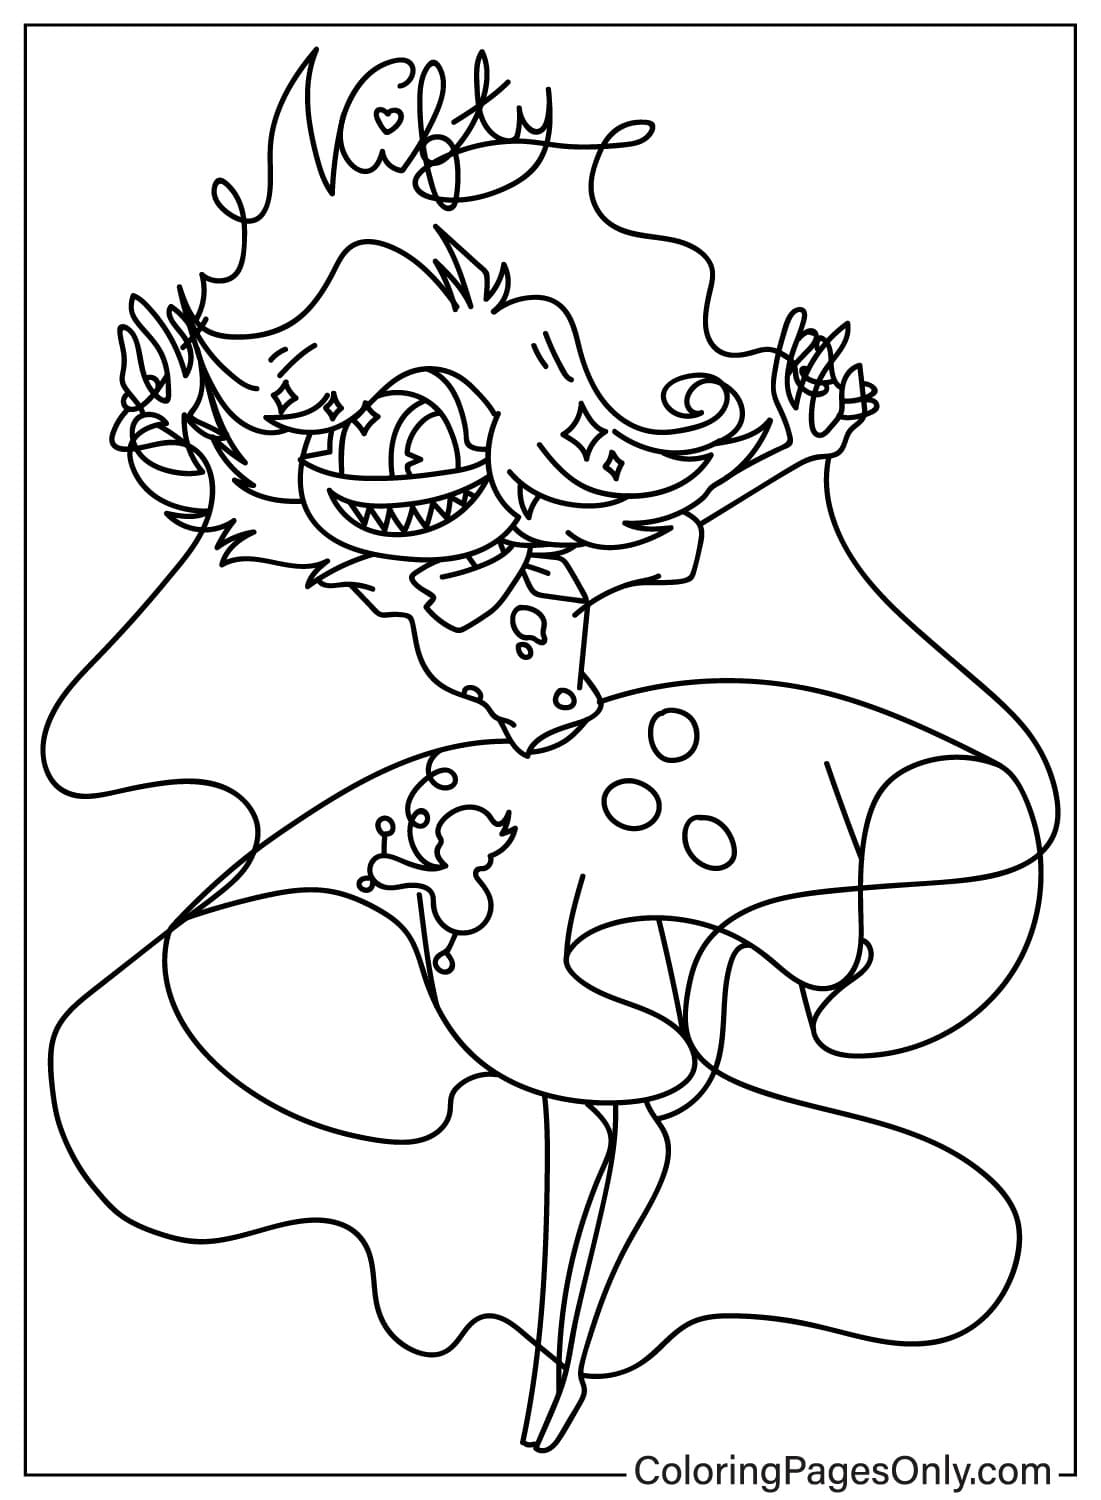 Niffty Coloring Page from Hazbin Hotel